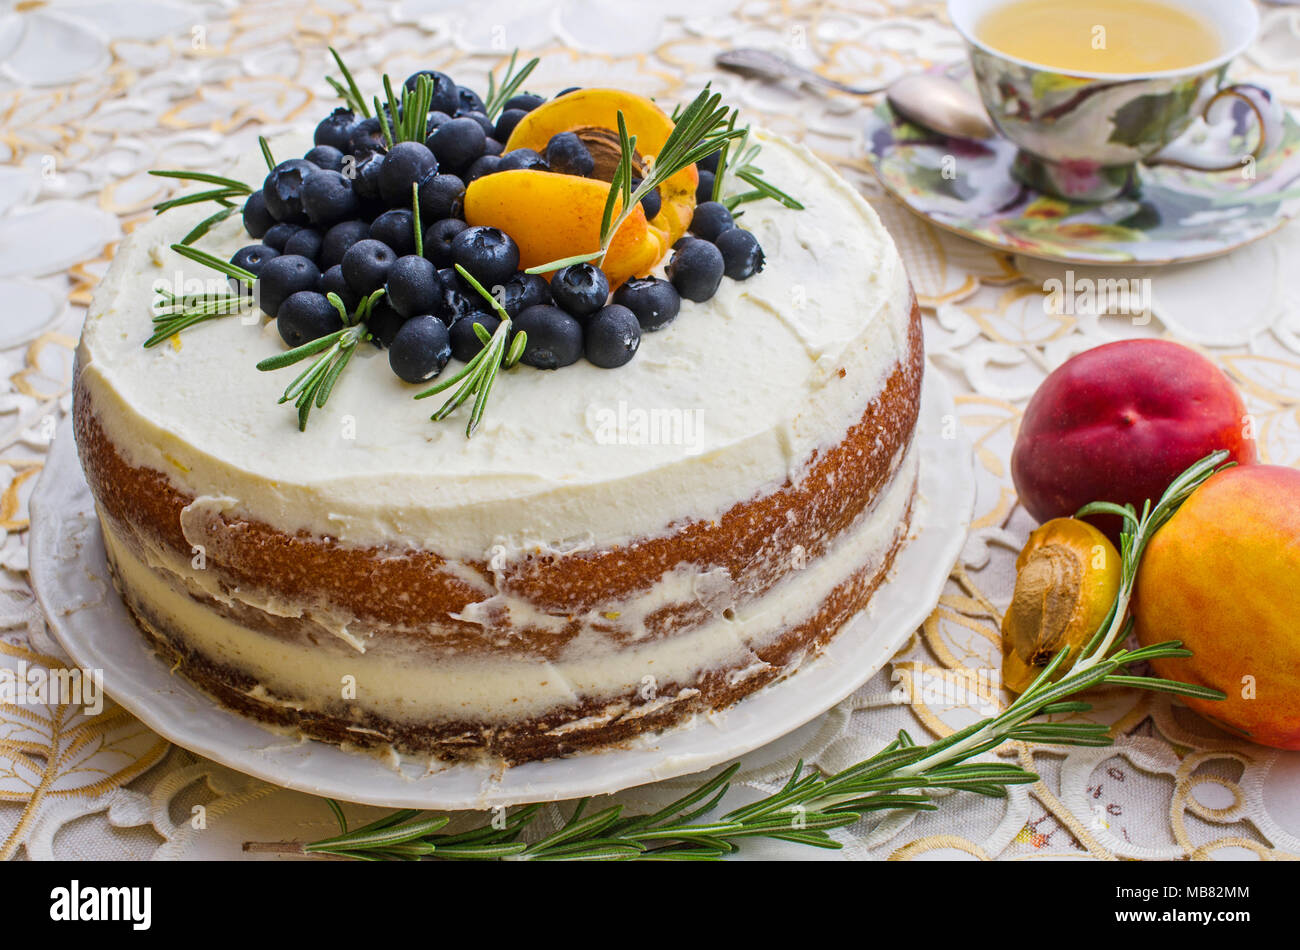 side view of delicious homemade cake with cream, berries, rosemary and nectarine on top on a decorative white table cloth next to a vintage cup of tea Stock Photo